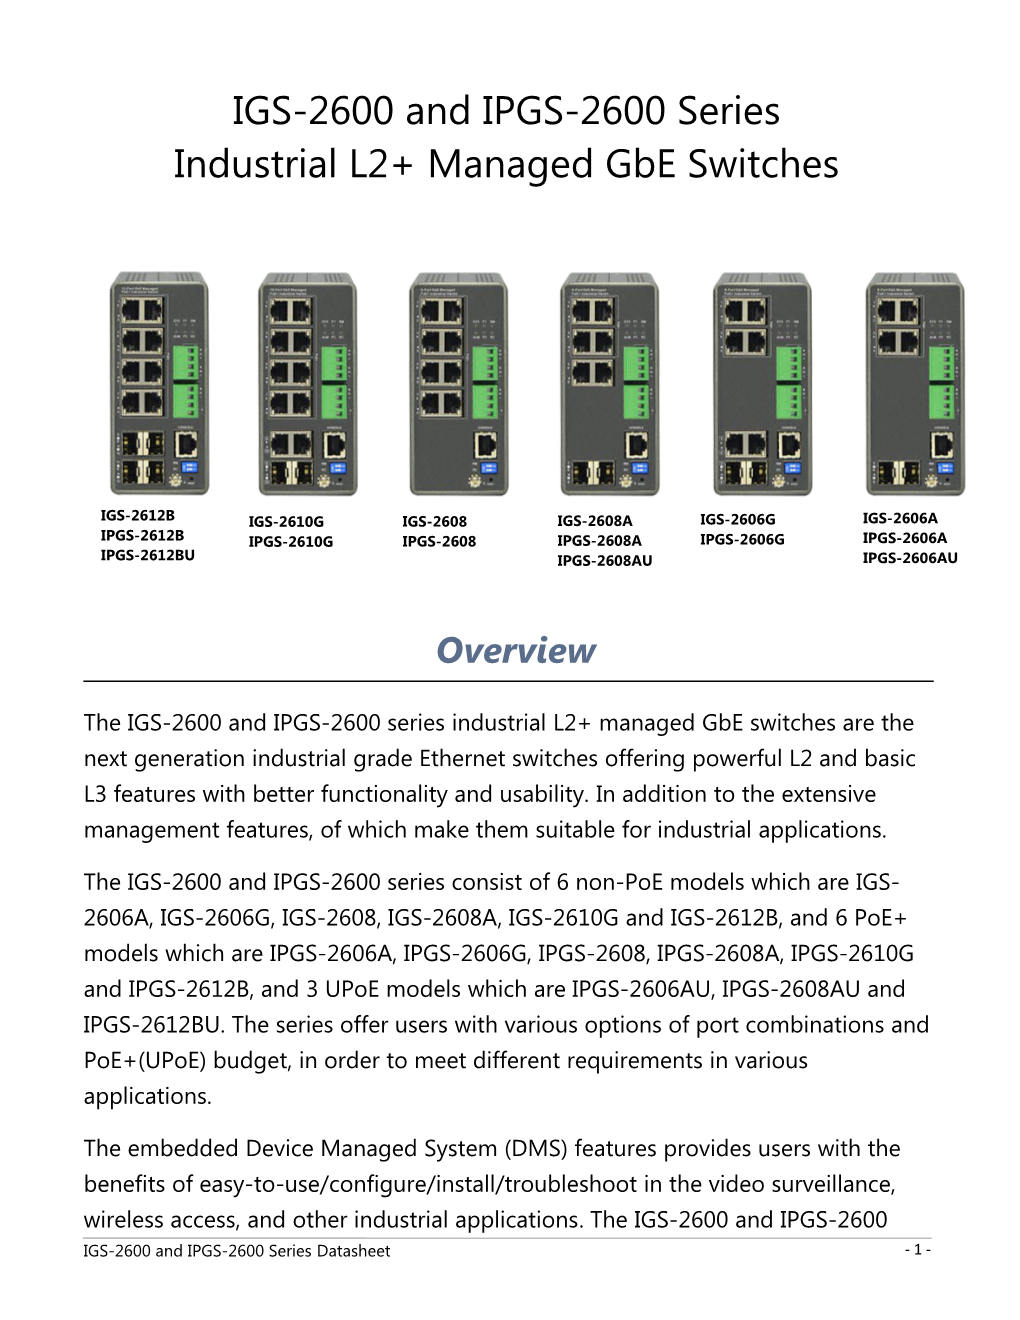 IGS-2600 and IPGS-2600 Series